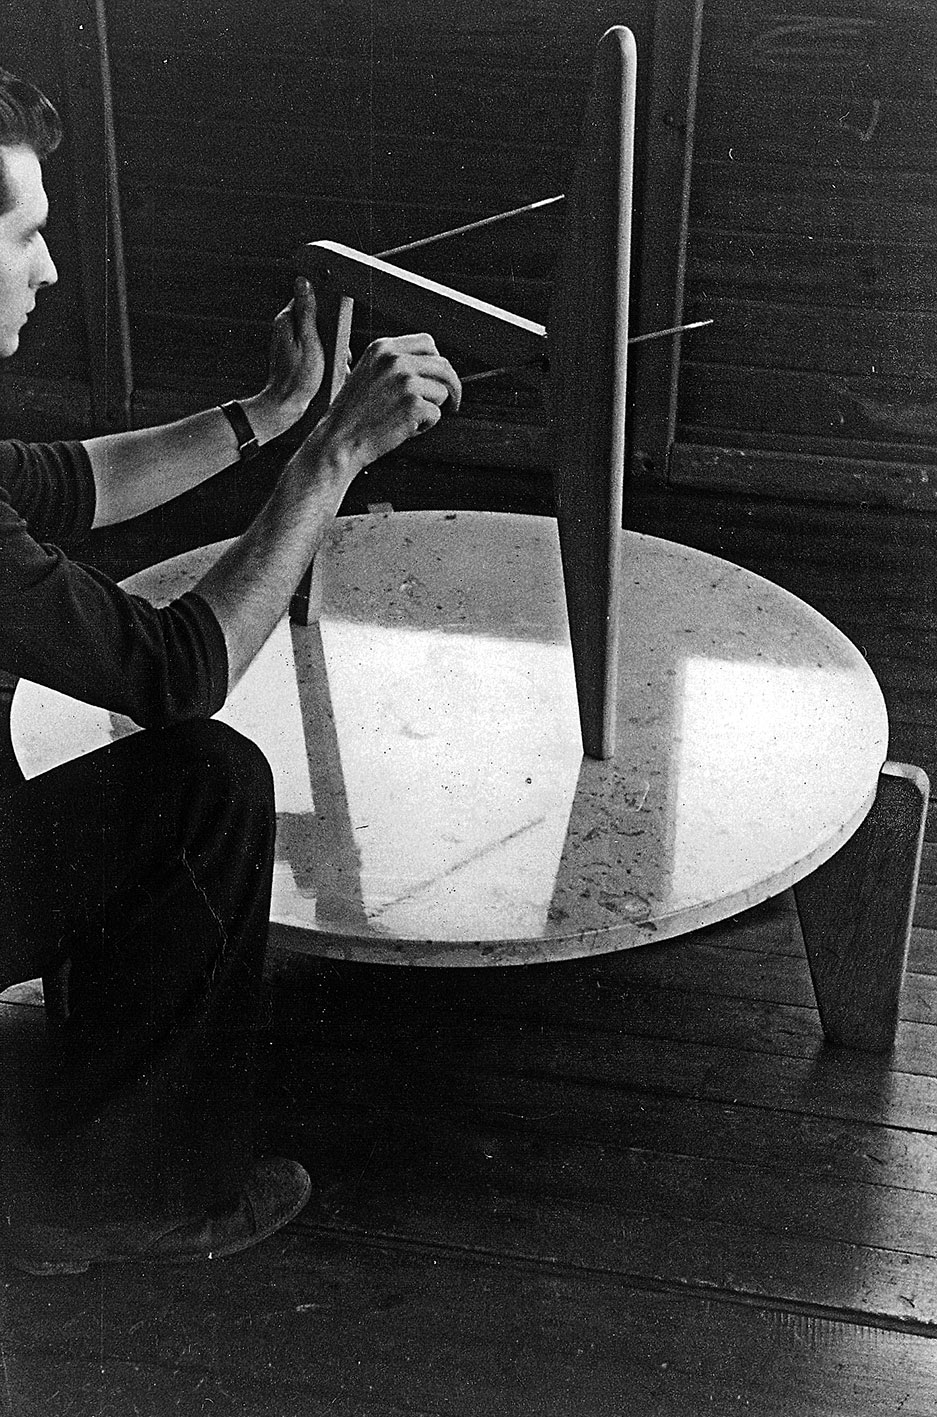 Demountable wooden chair CB 22. Demonstration of assemblage by André Le Stang, employee of the Ateliers Jean Prouvé in Jean Prouvé’s office in Maxéville, c. 1949.